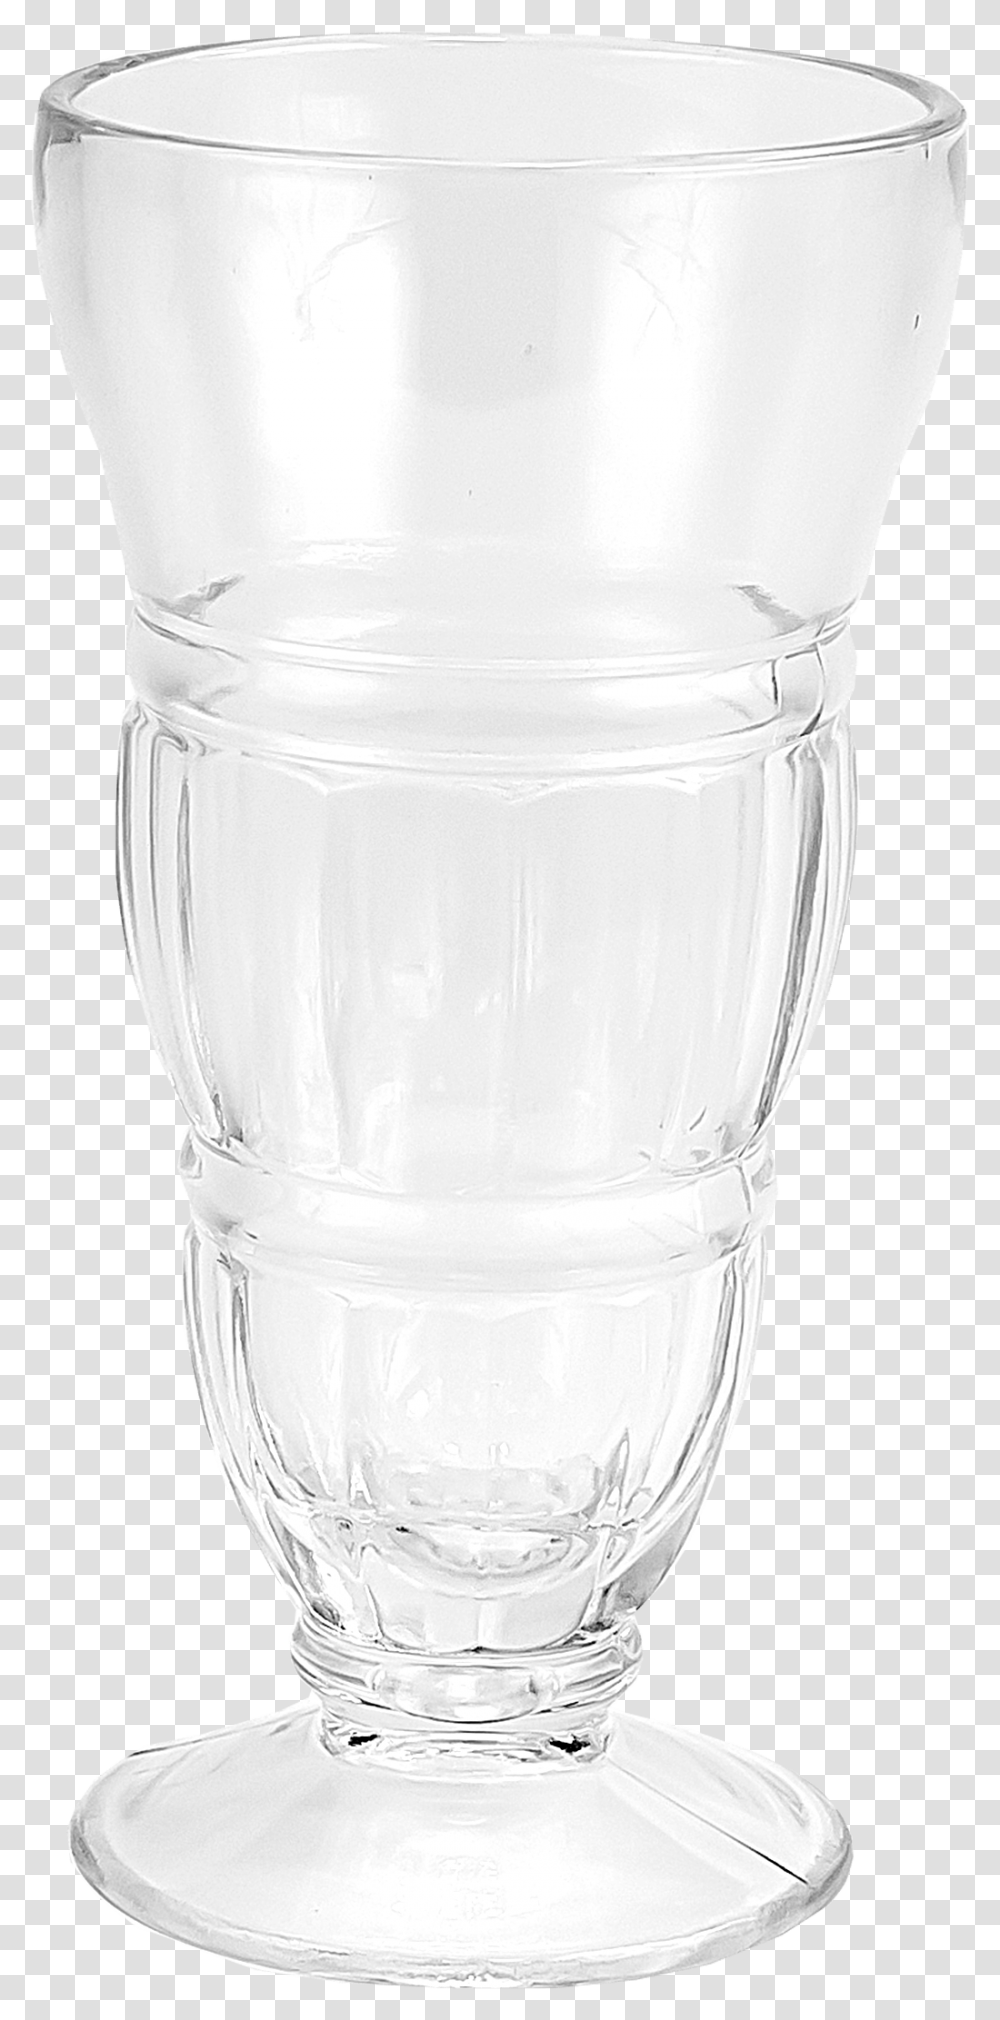 Champagne Glass Download Champagne Glass, Jar, Bowl, Mixer, Appliance Transparent Png